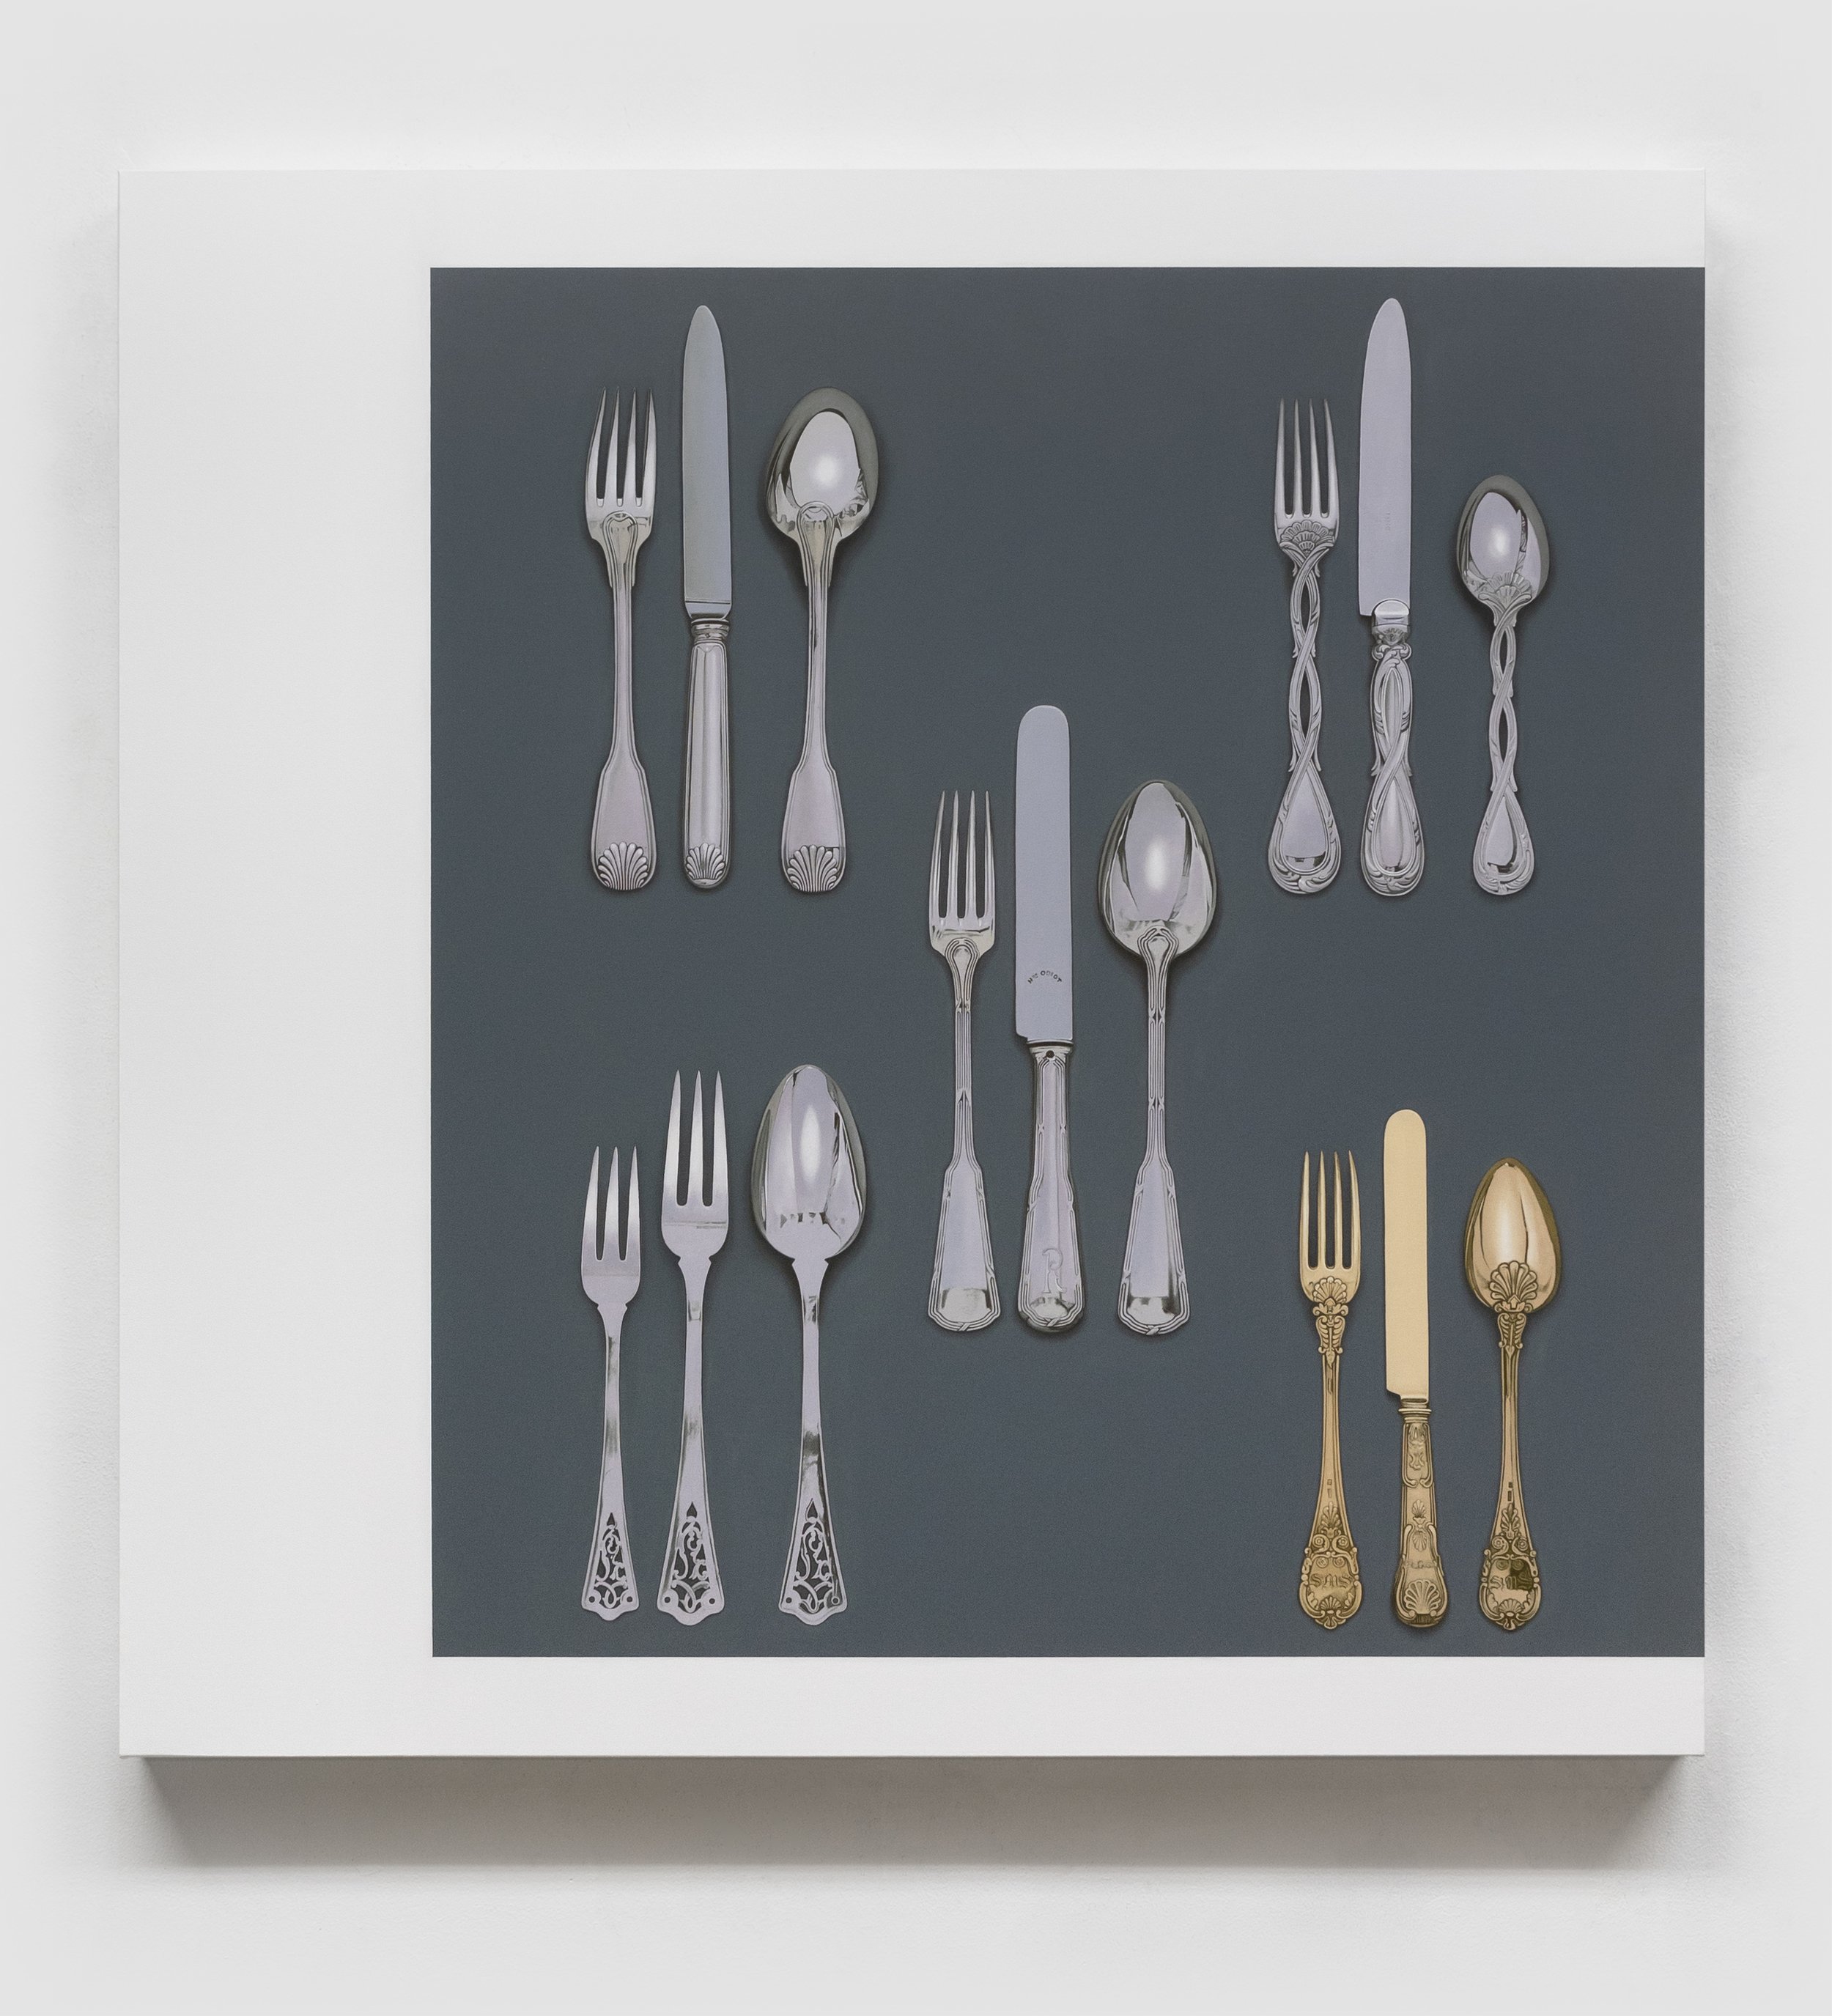 • 229 A FRENCH SILVER FLATWARE SET, PUIFORCAT, PARIS, EARLY 20th CENTURY, (Sotheby’s, Code name: 6481 SANDWICH) 